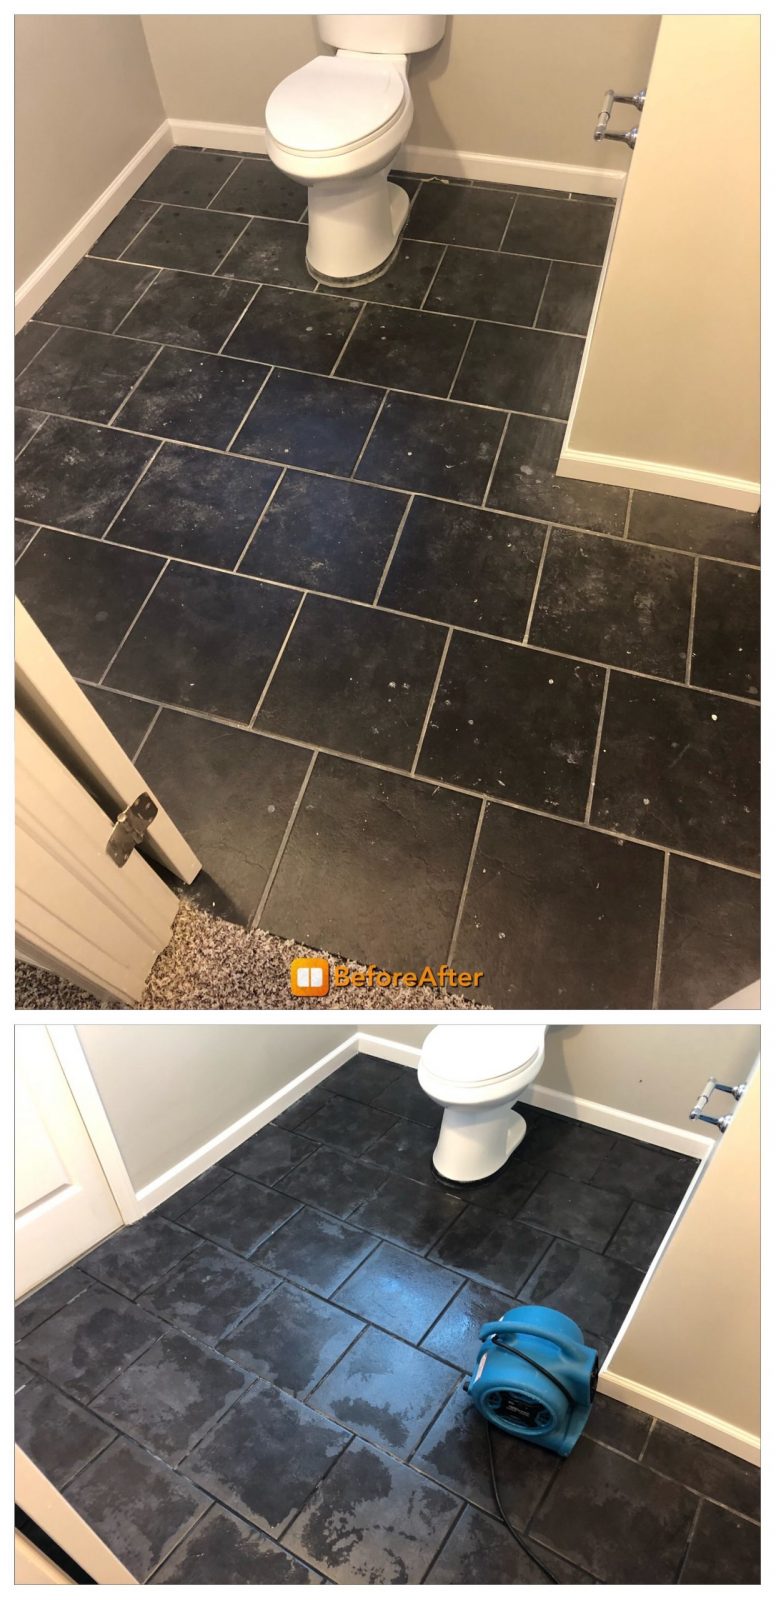 Professional Tile & Grout Cleaning Blue Ash Ohio by Howards Cleaning Service